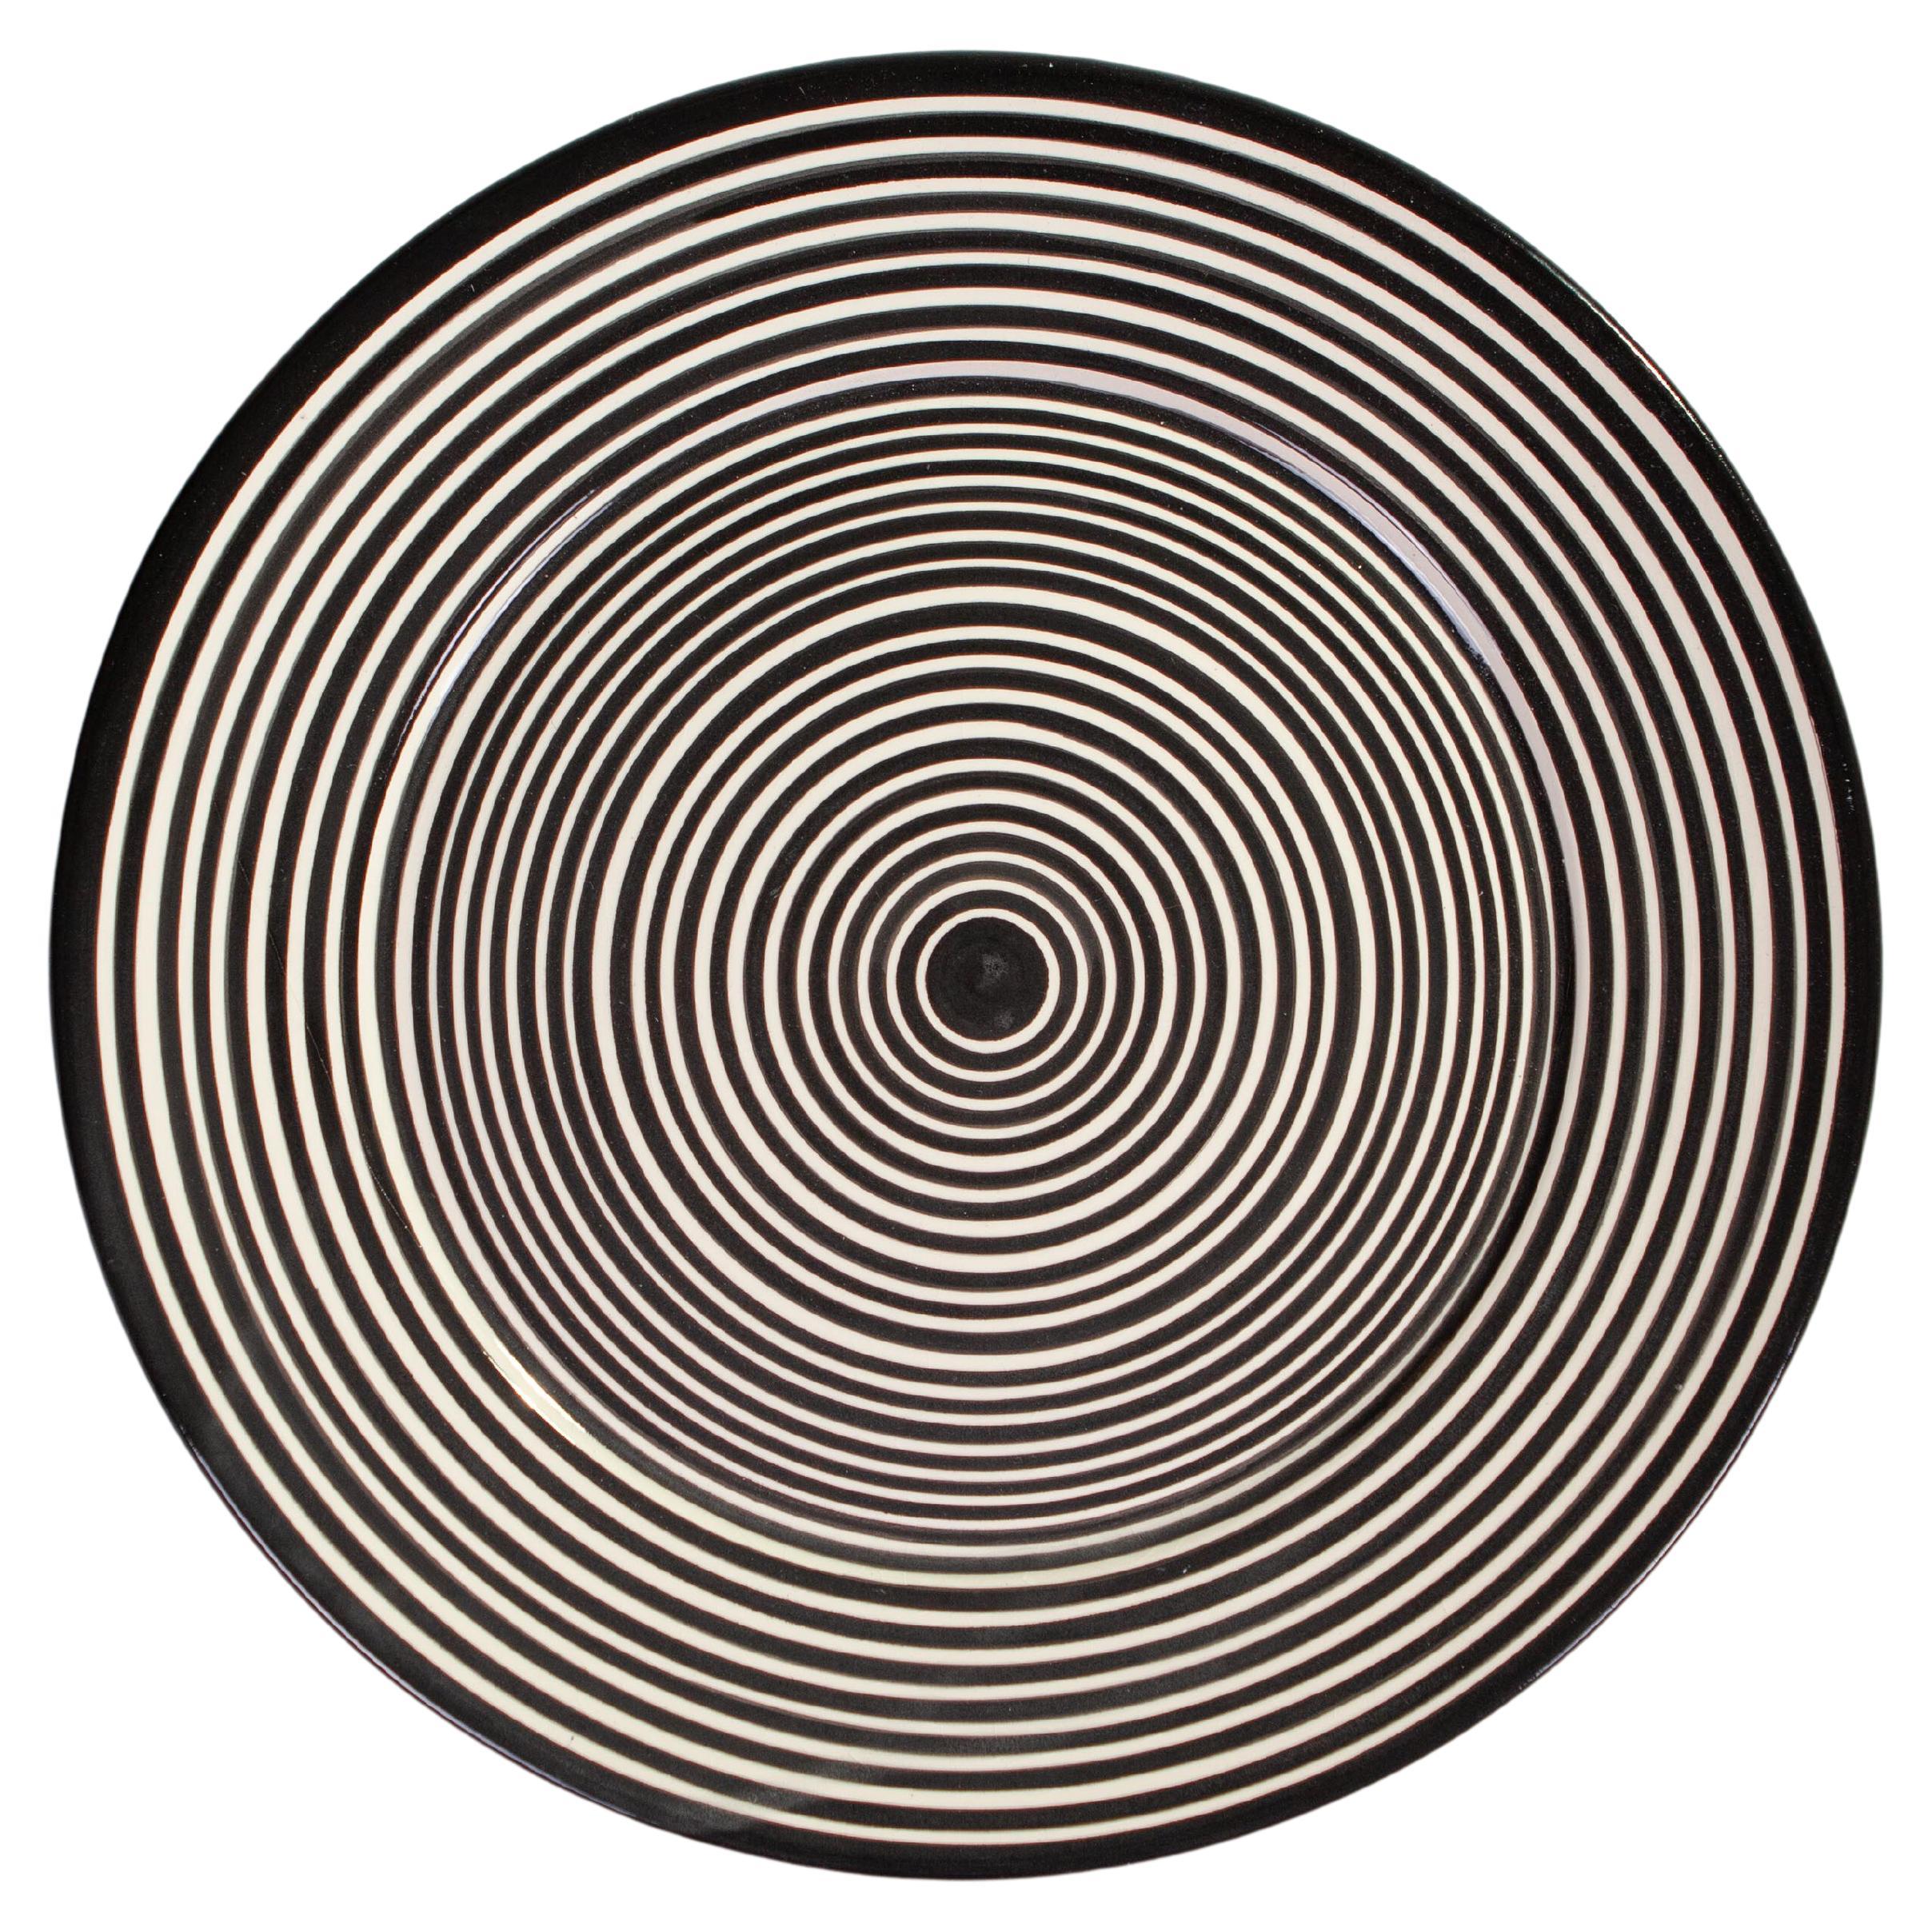 Handmade Ceramic Stripped Platter with Graphic Black and White Design, in Stock For Sale